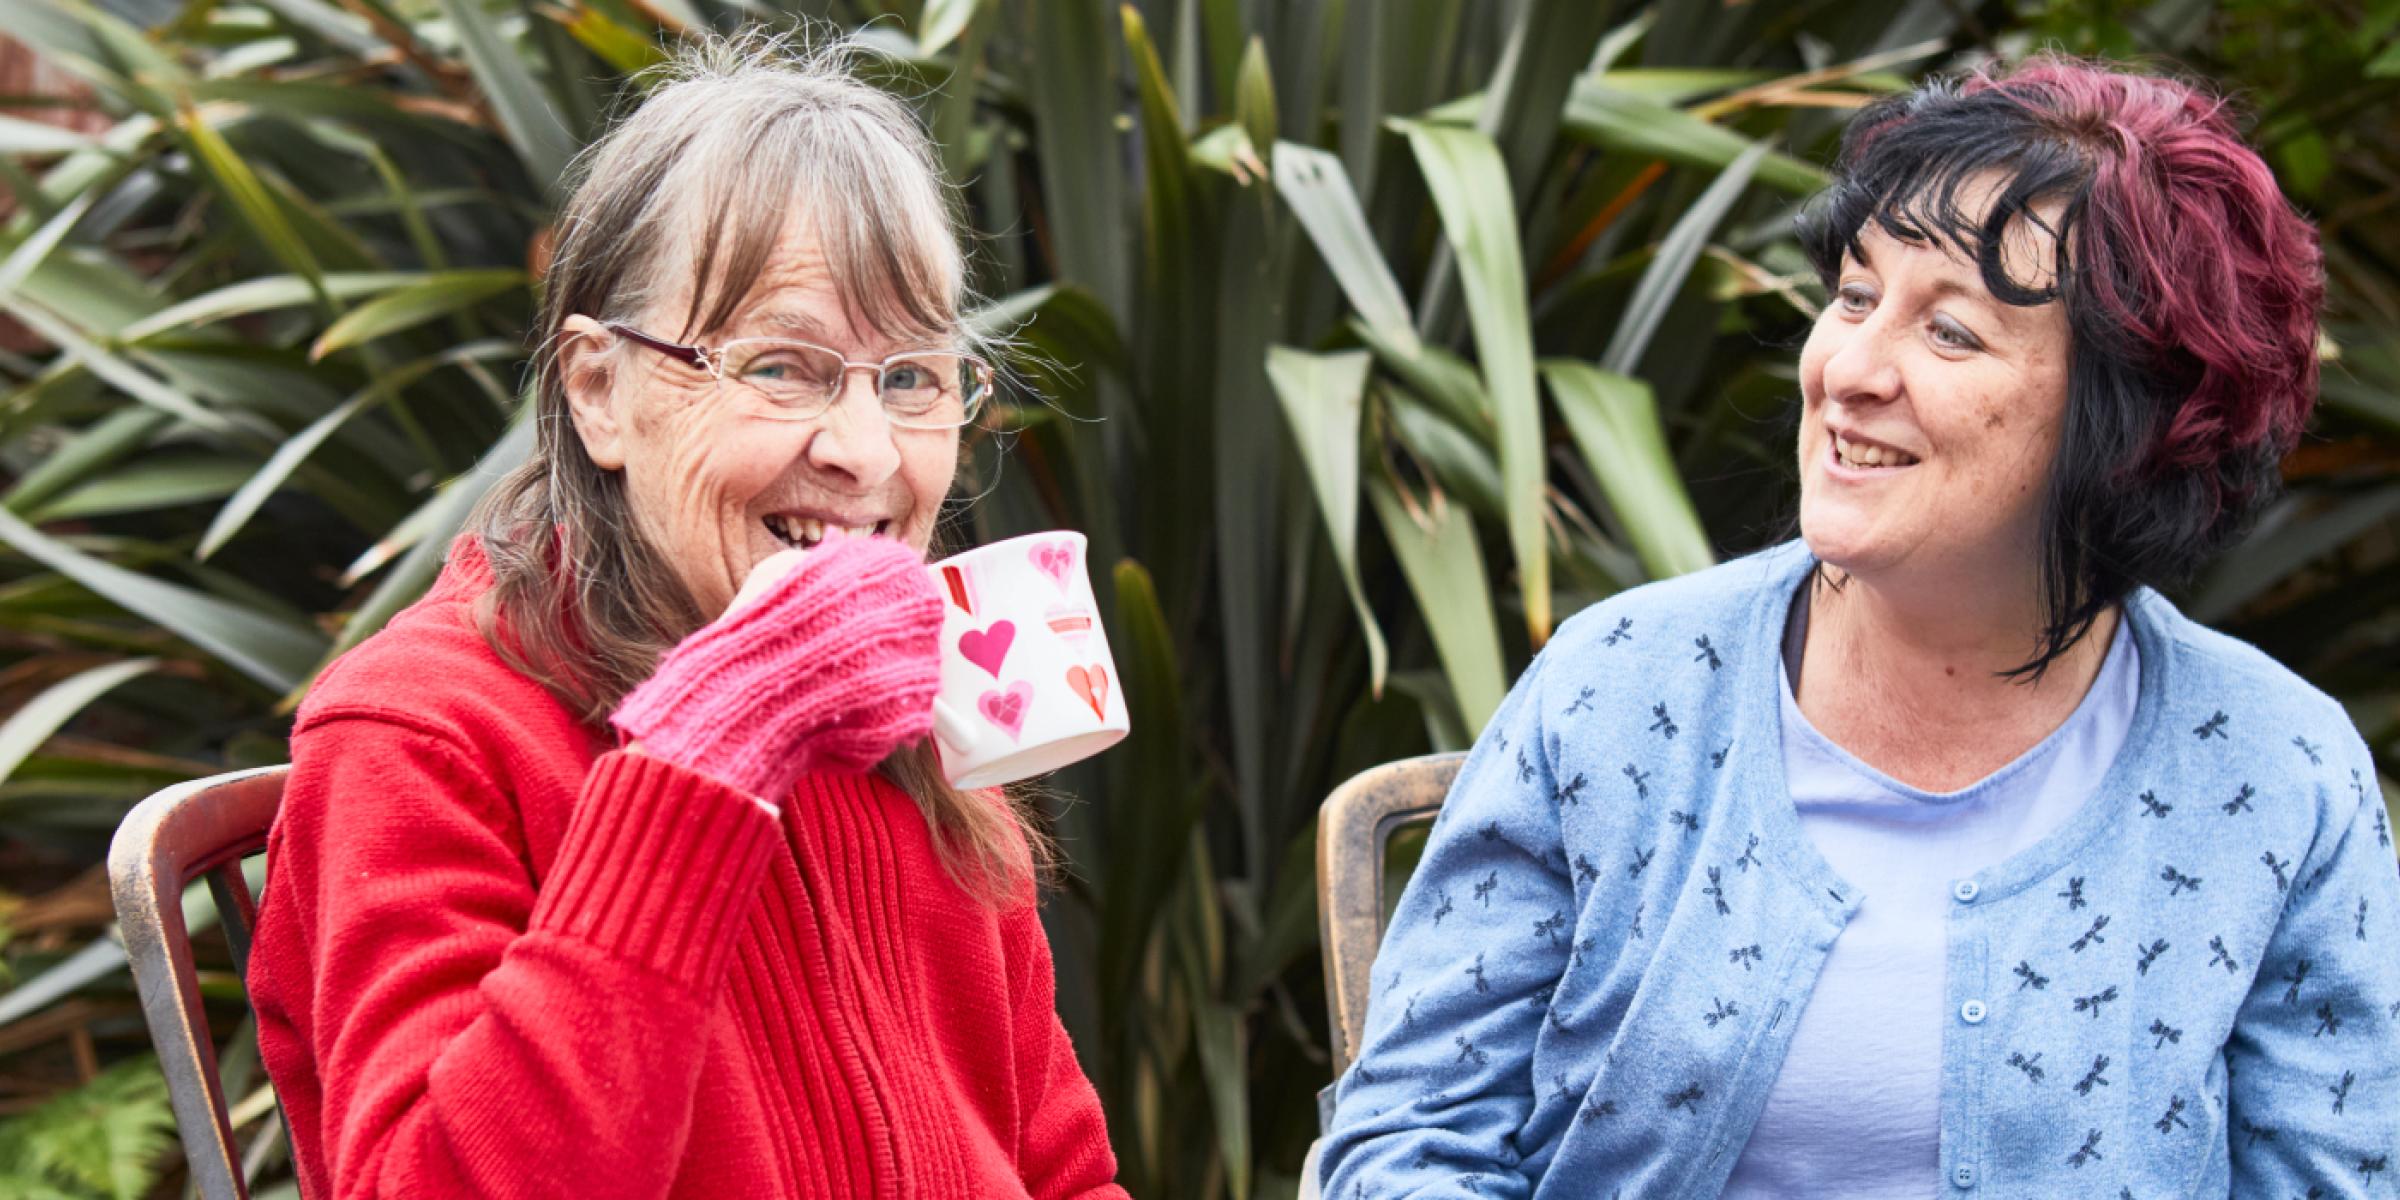 Louise and Marion sitting outside with a cup of tea wearing gloves and enjoying a conversation